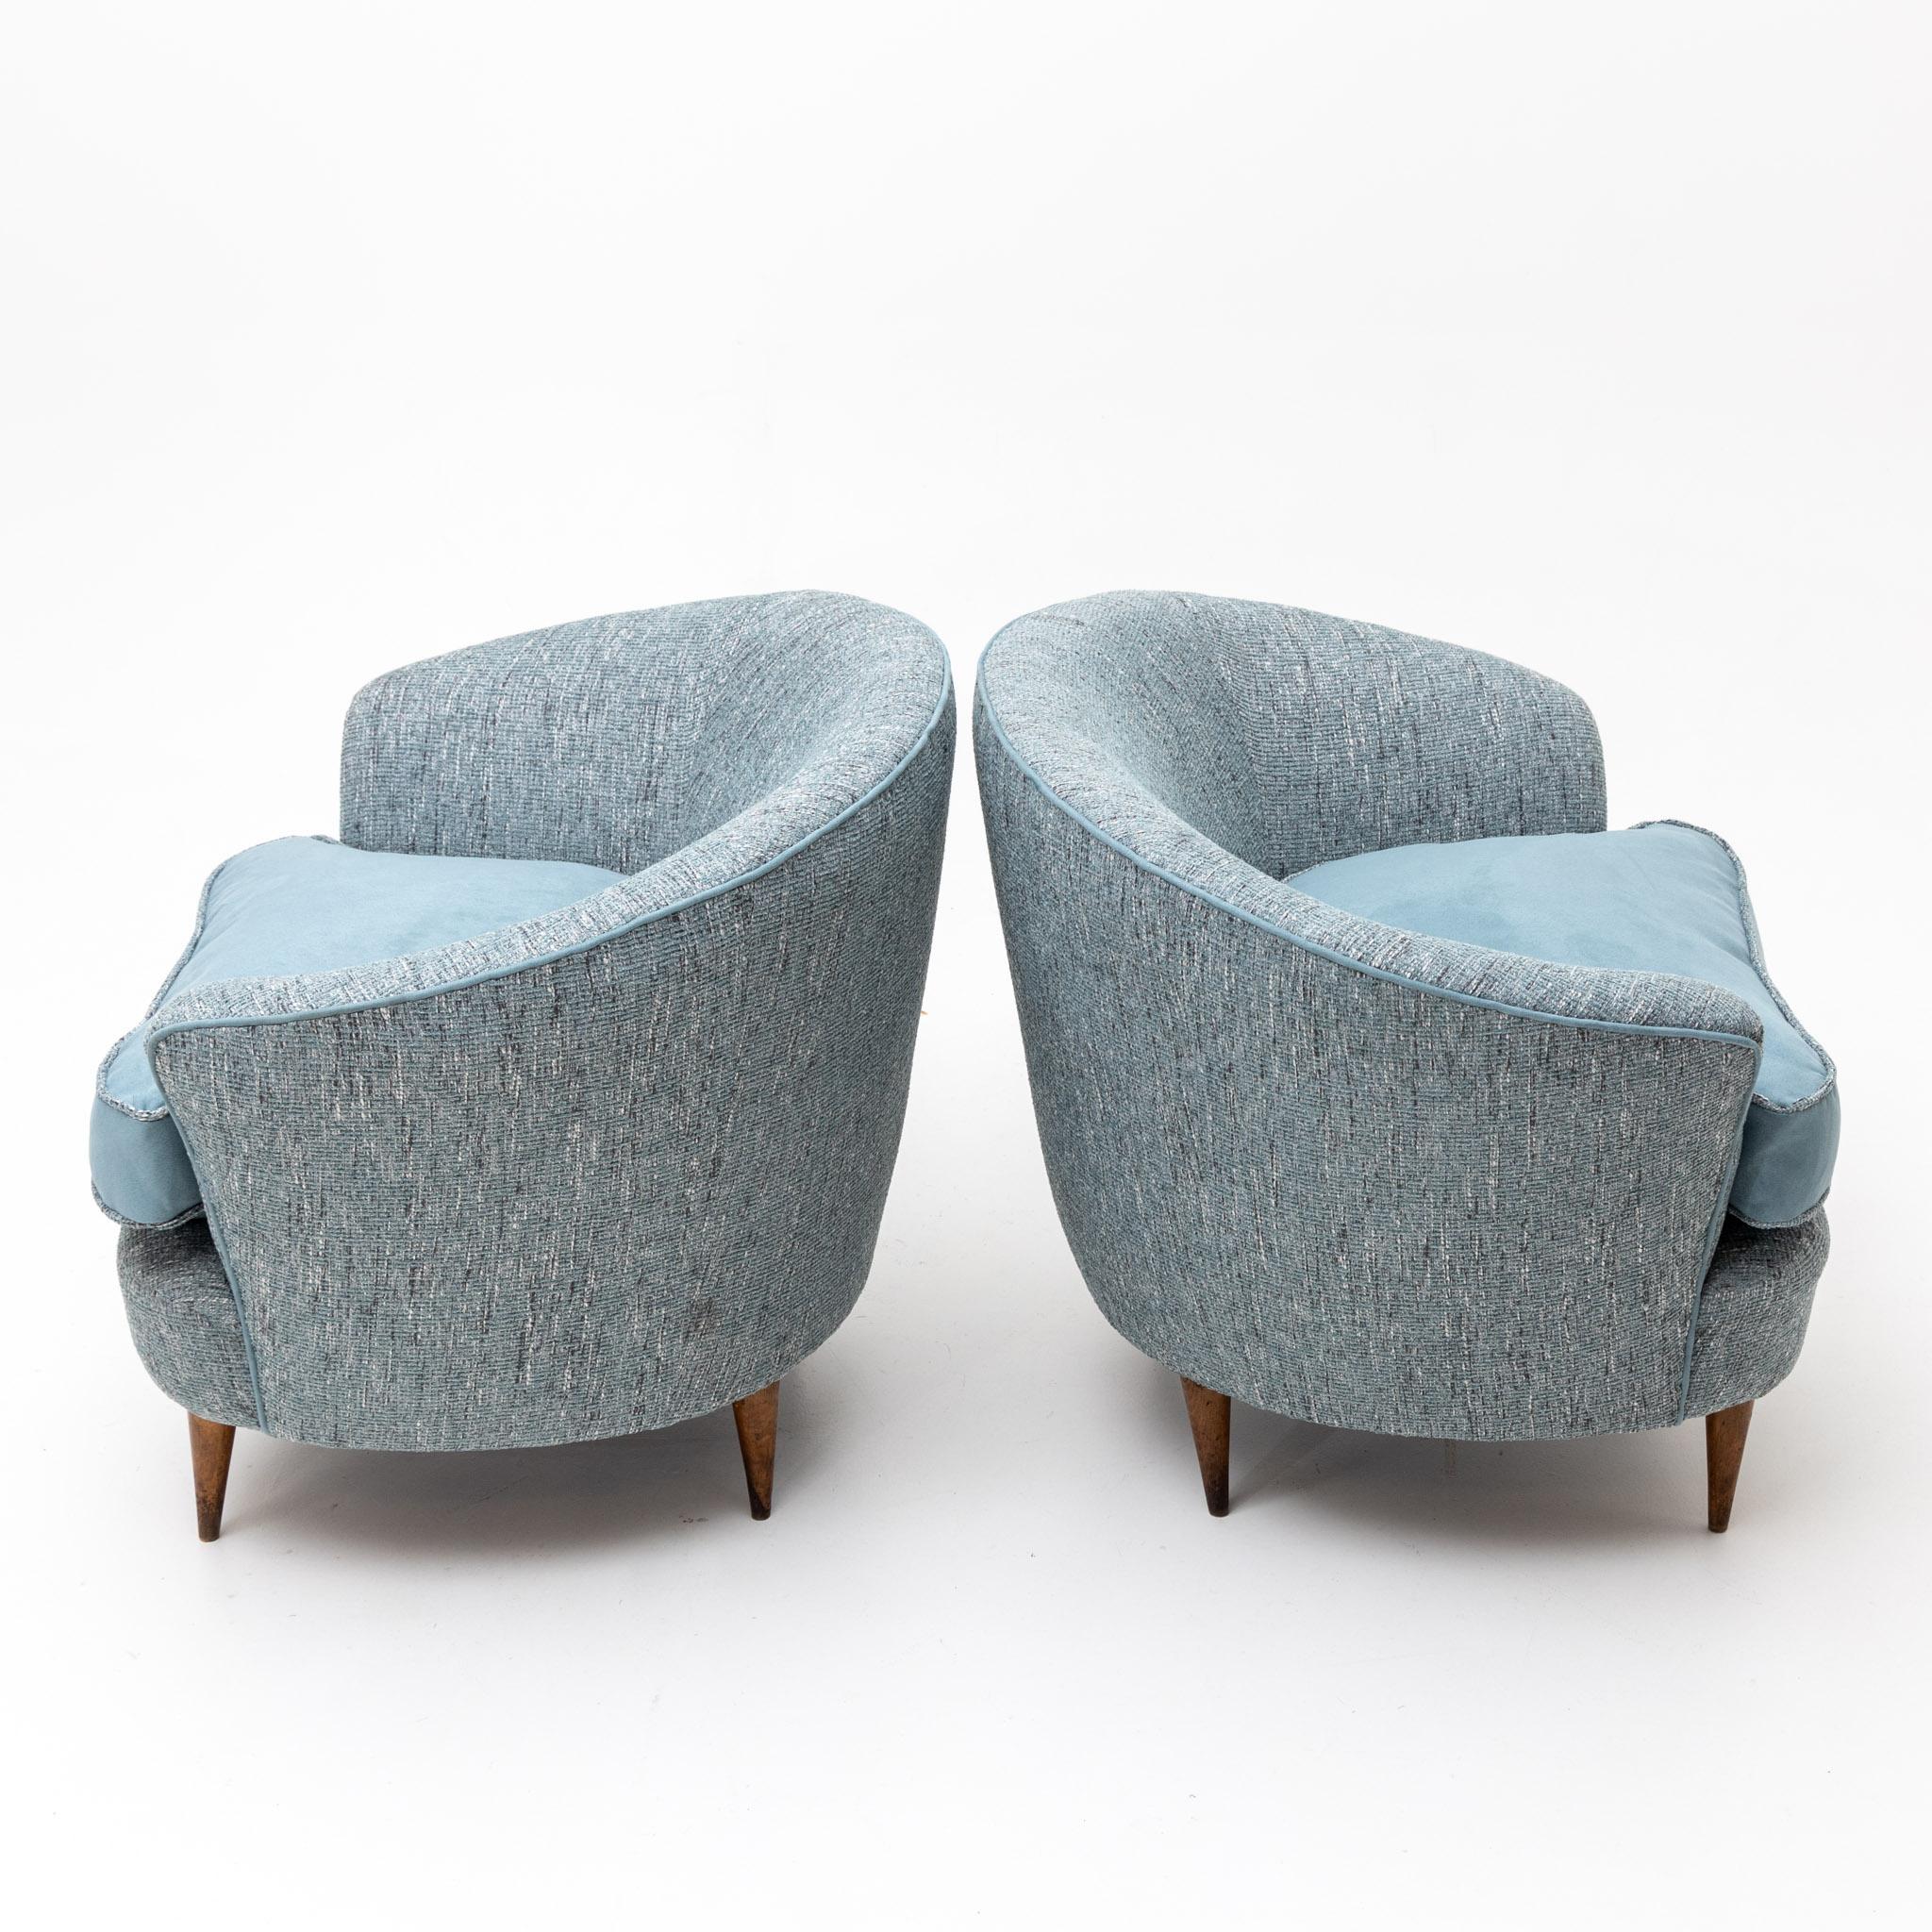 Pair of Italian lounge chairs on conical wooden legs with blue cover and seat cushion, newly upholstered.